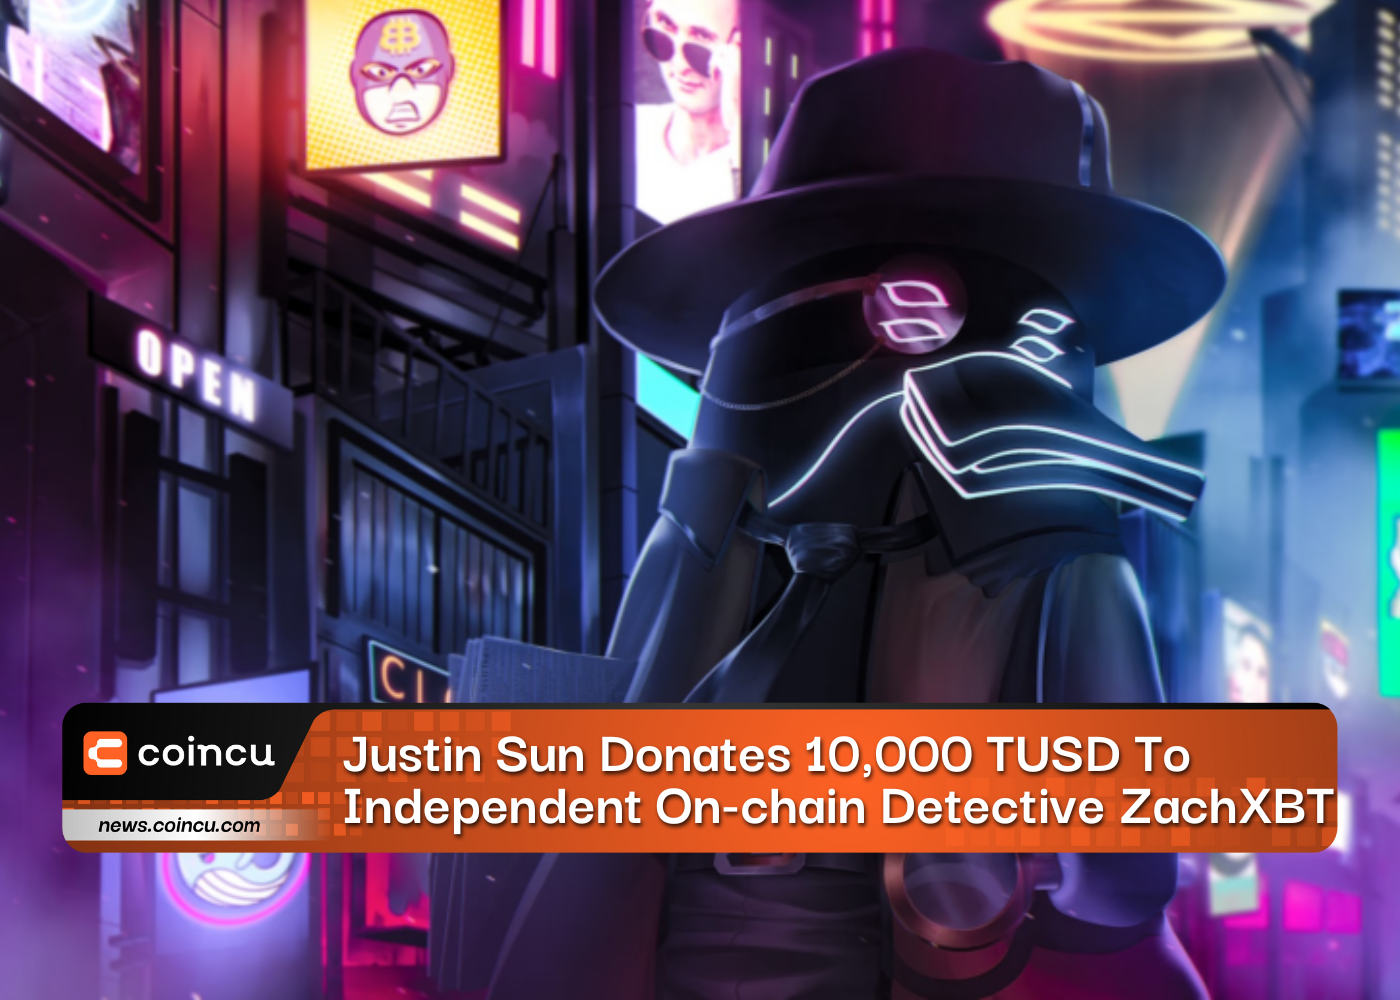 Justin Sun Donates 10,000 TUSD To Independent On-chain Detective ZachXBT